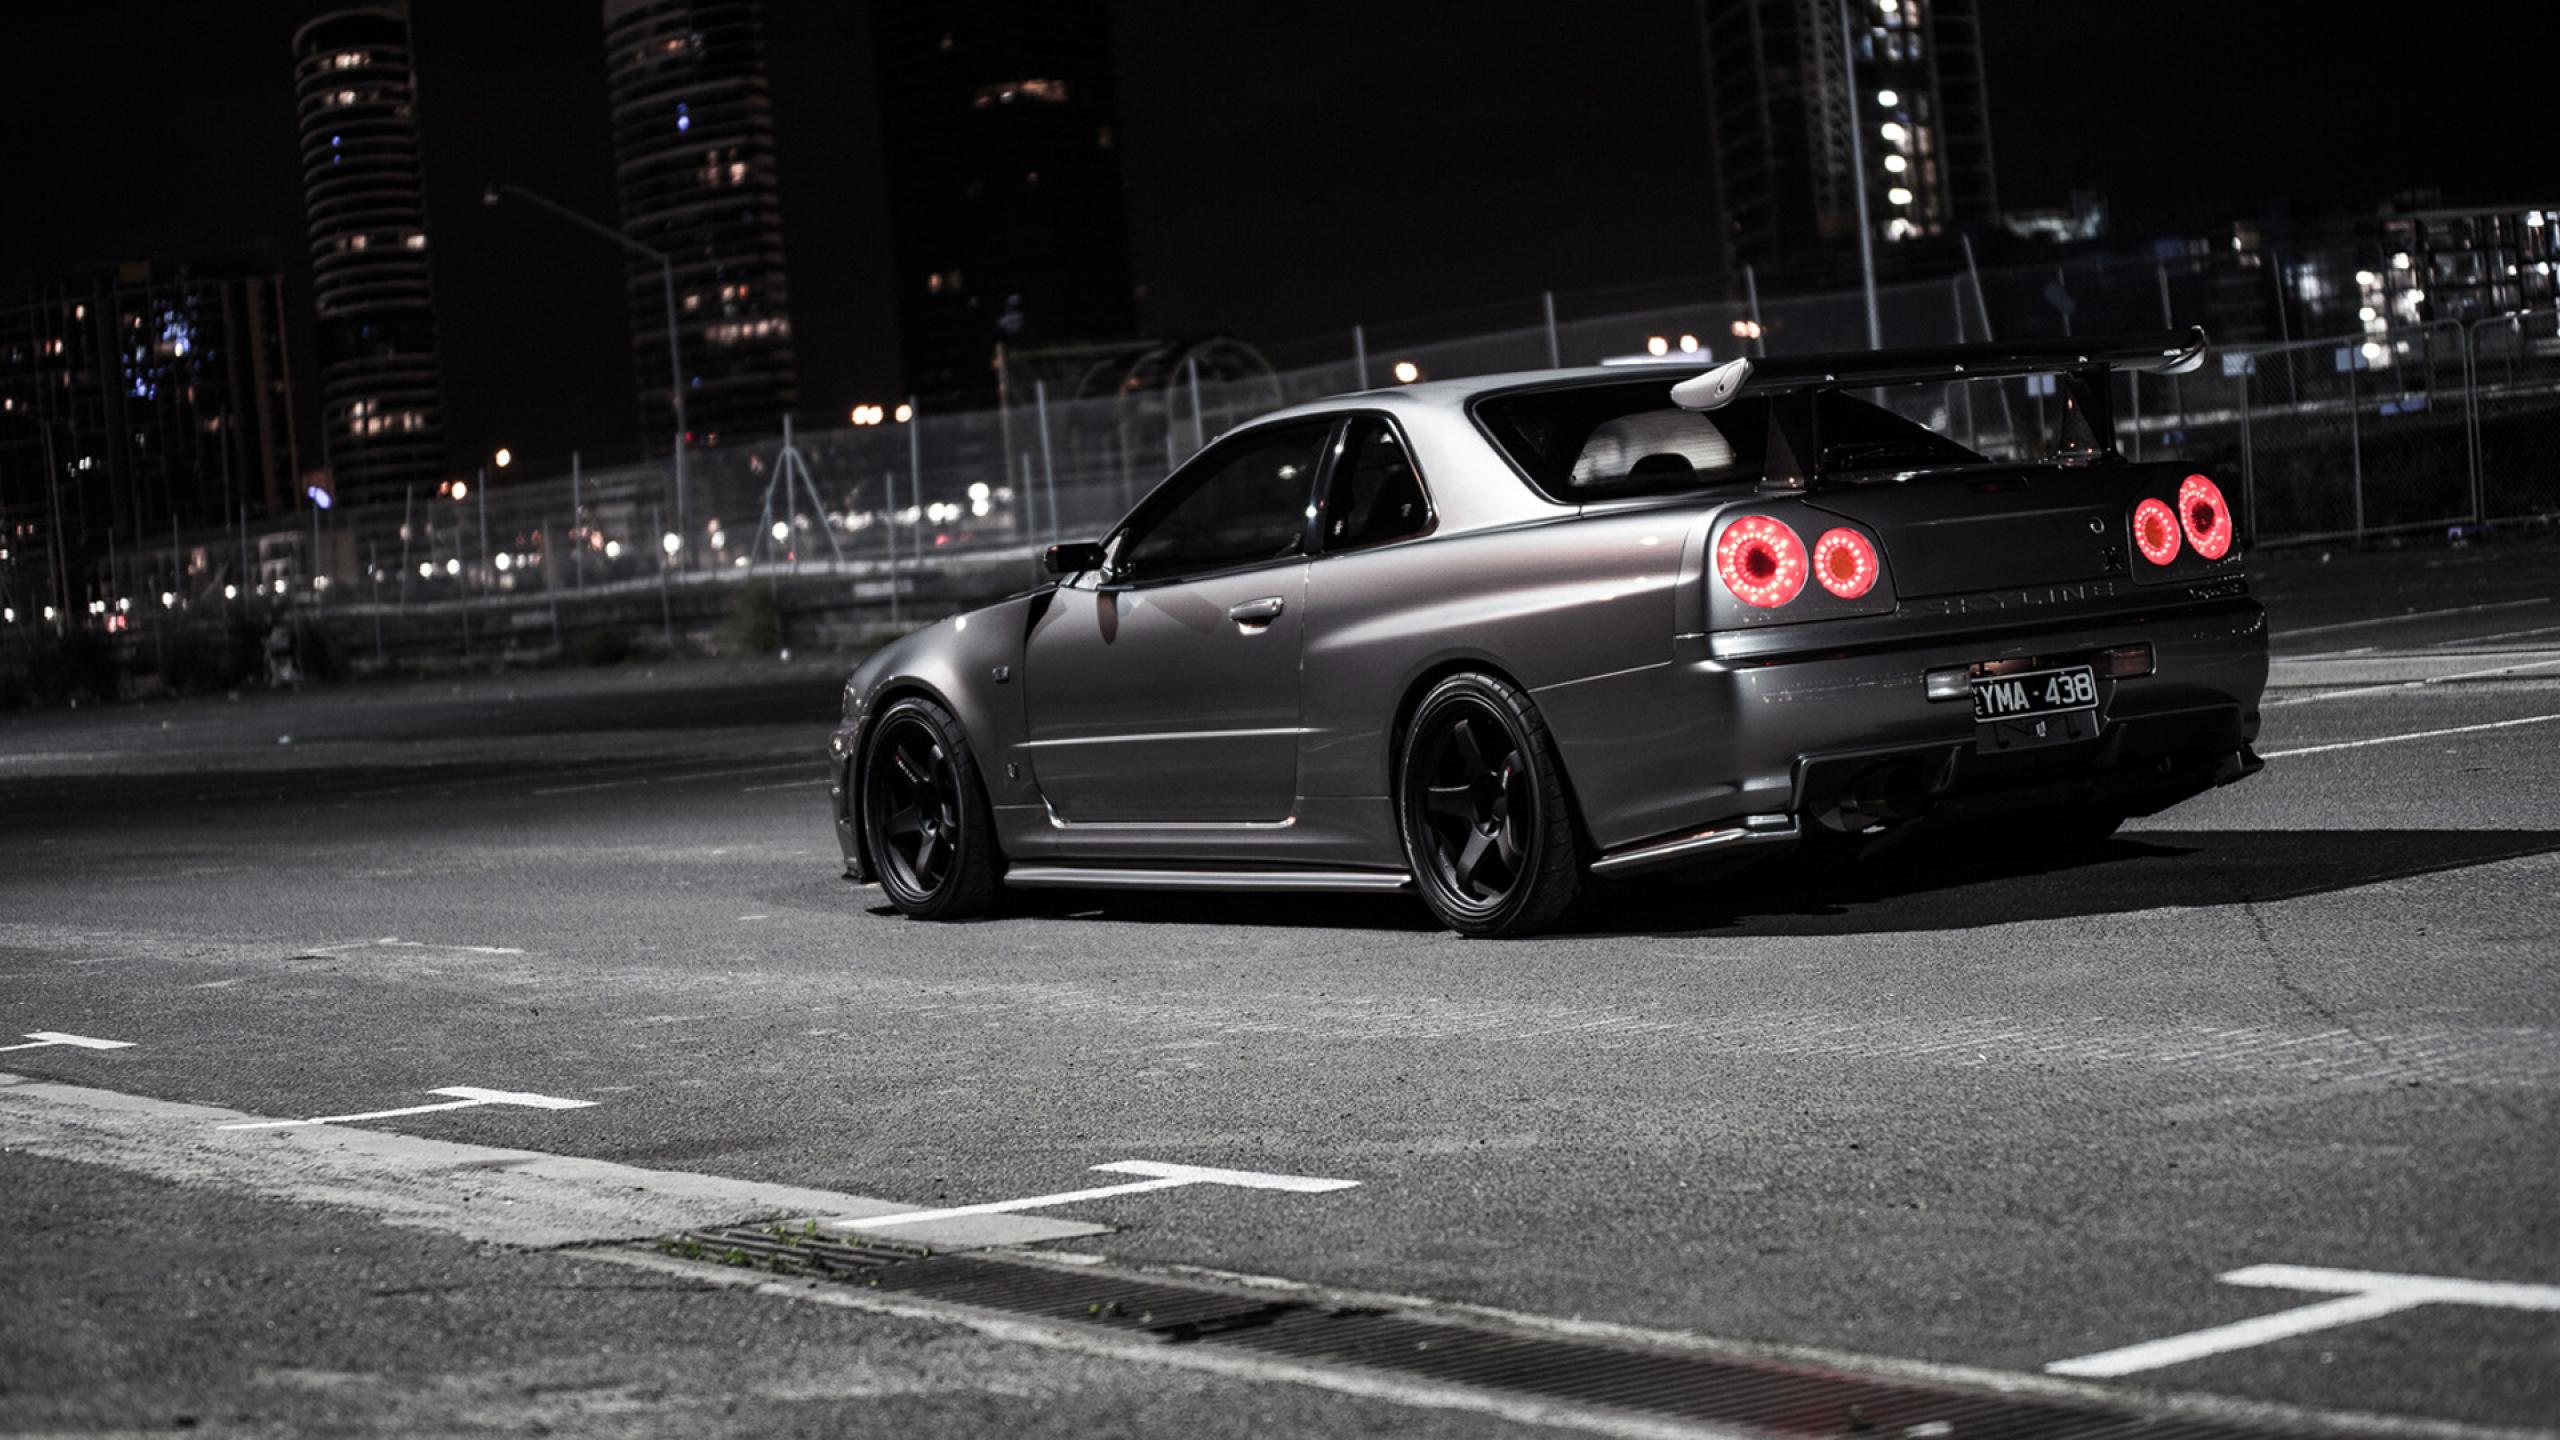 Nissan Skyline Gt R Wallpaper HD Full Pictures